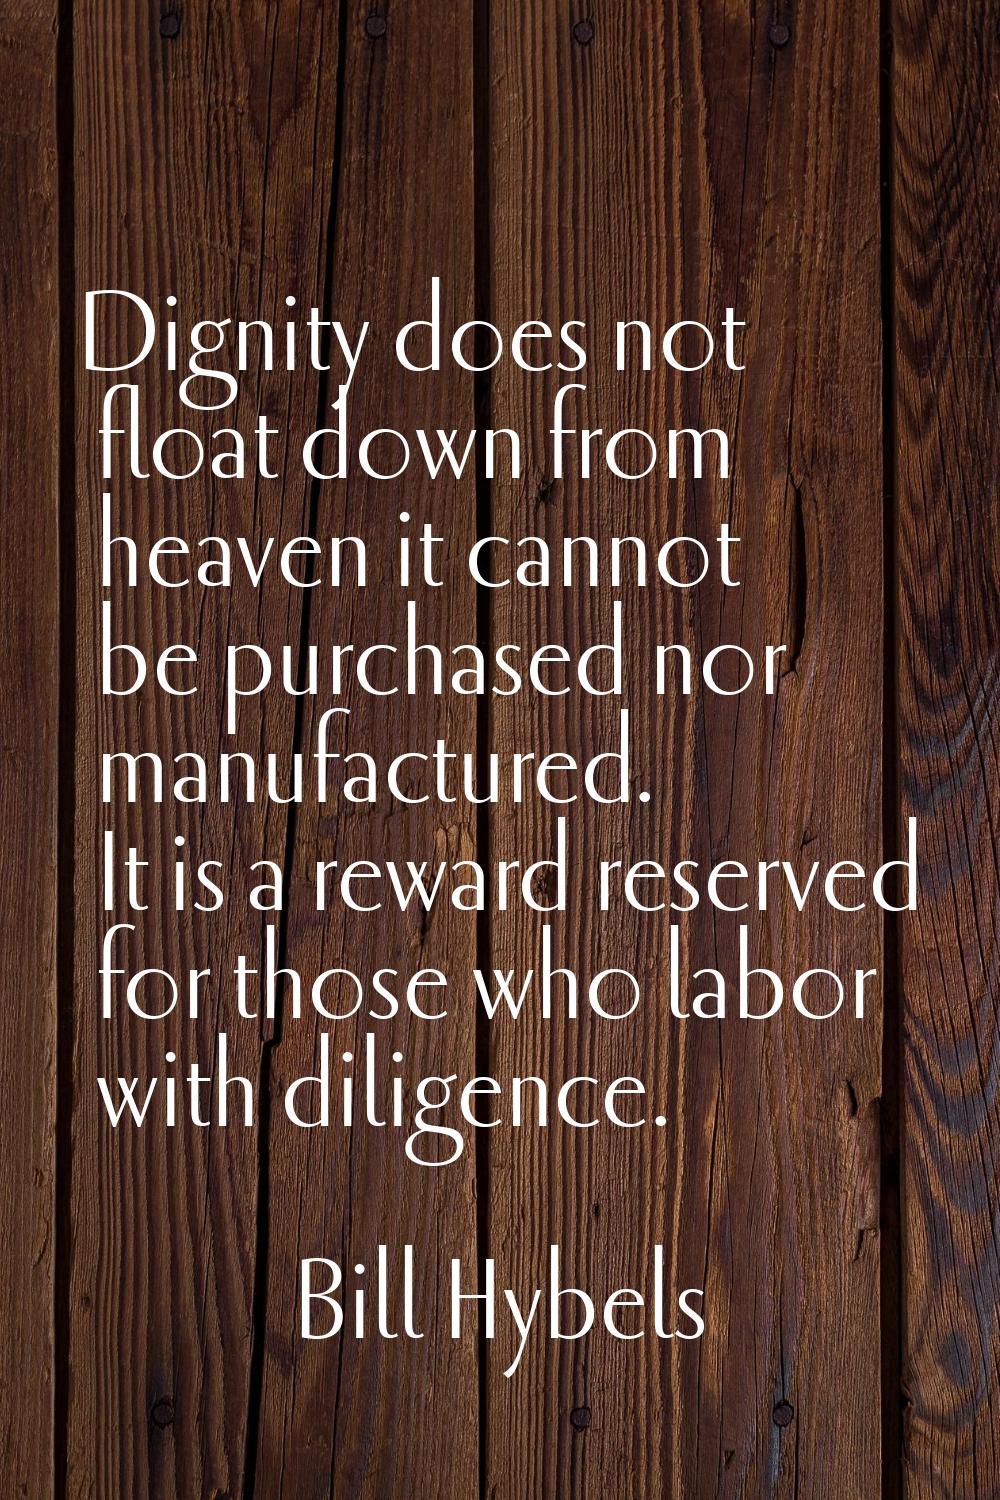 Dignity does not float down from heaven it cannot be purchased nor manufactured. It is a reward res